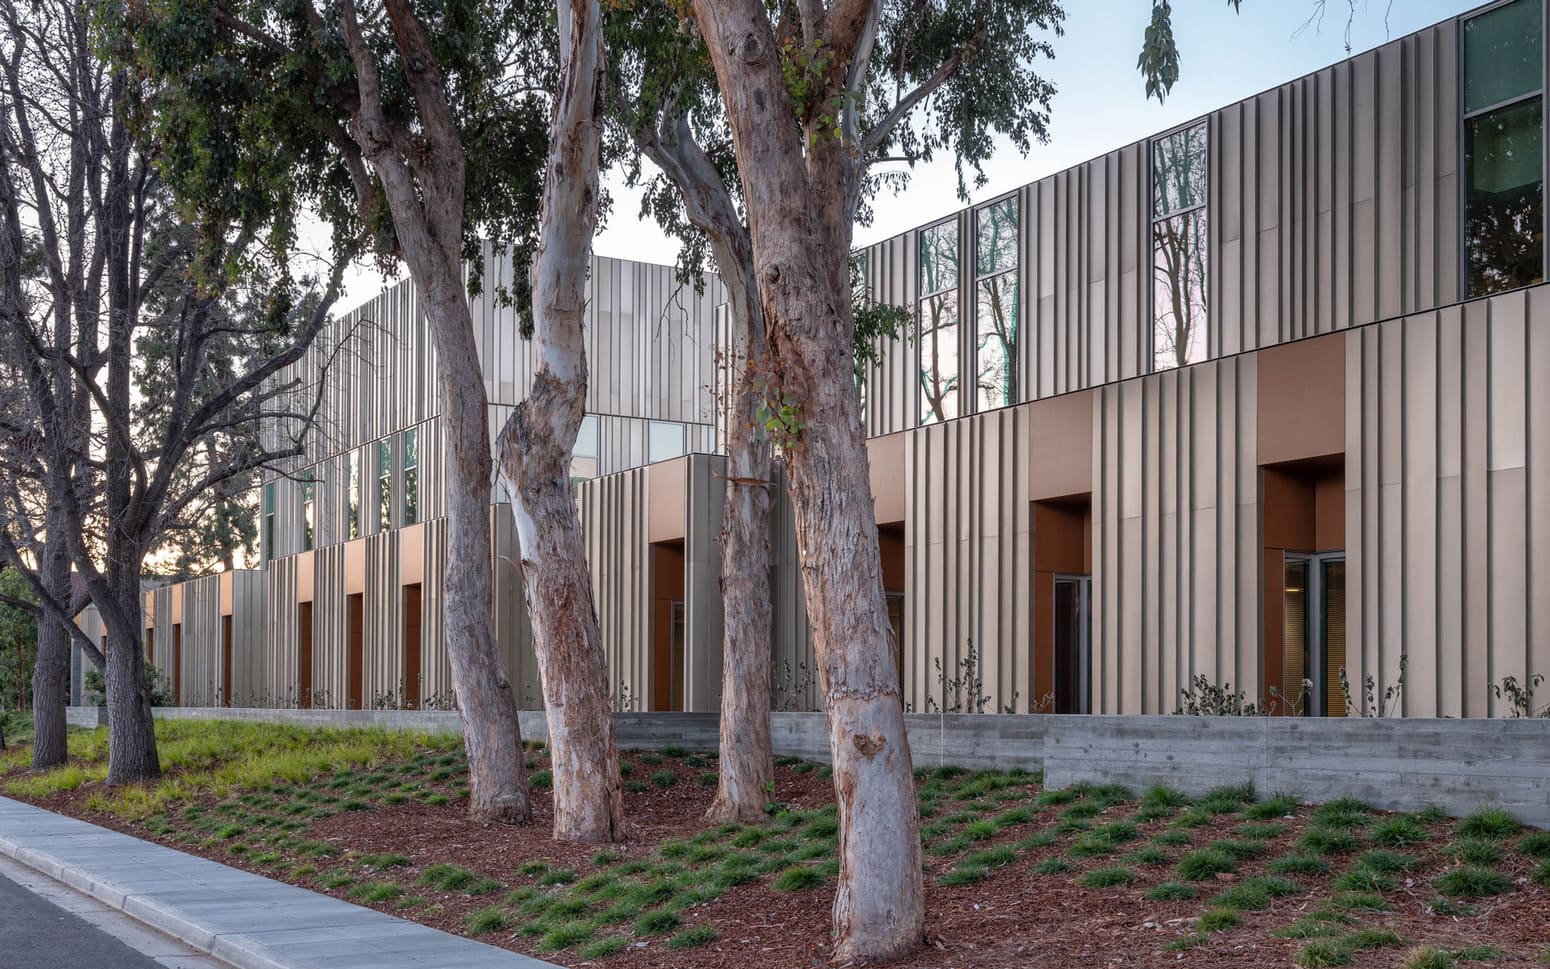 Building with a row of mature trees in front